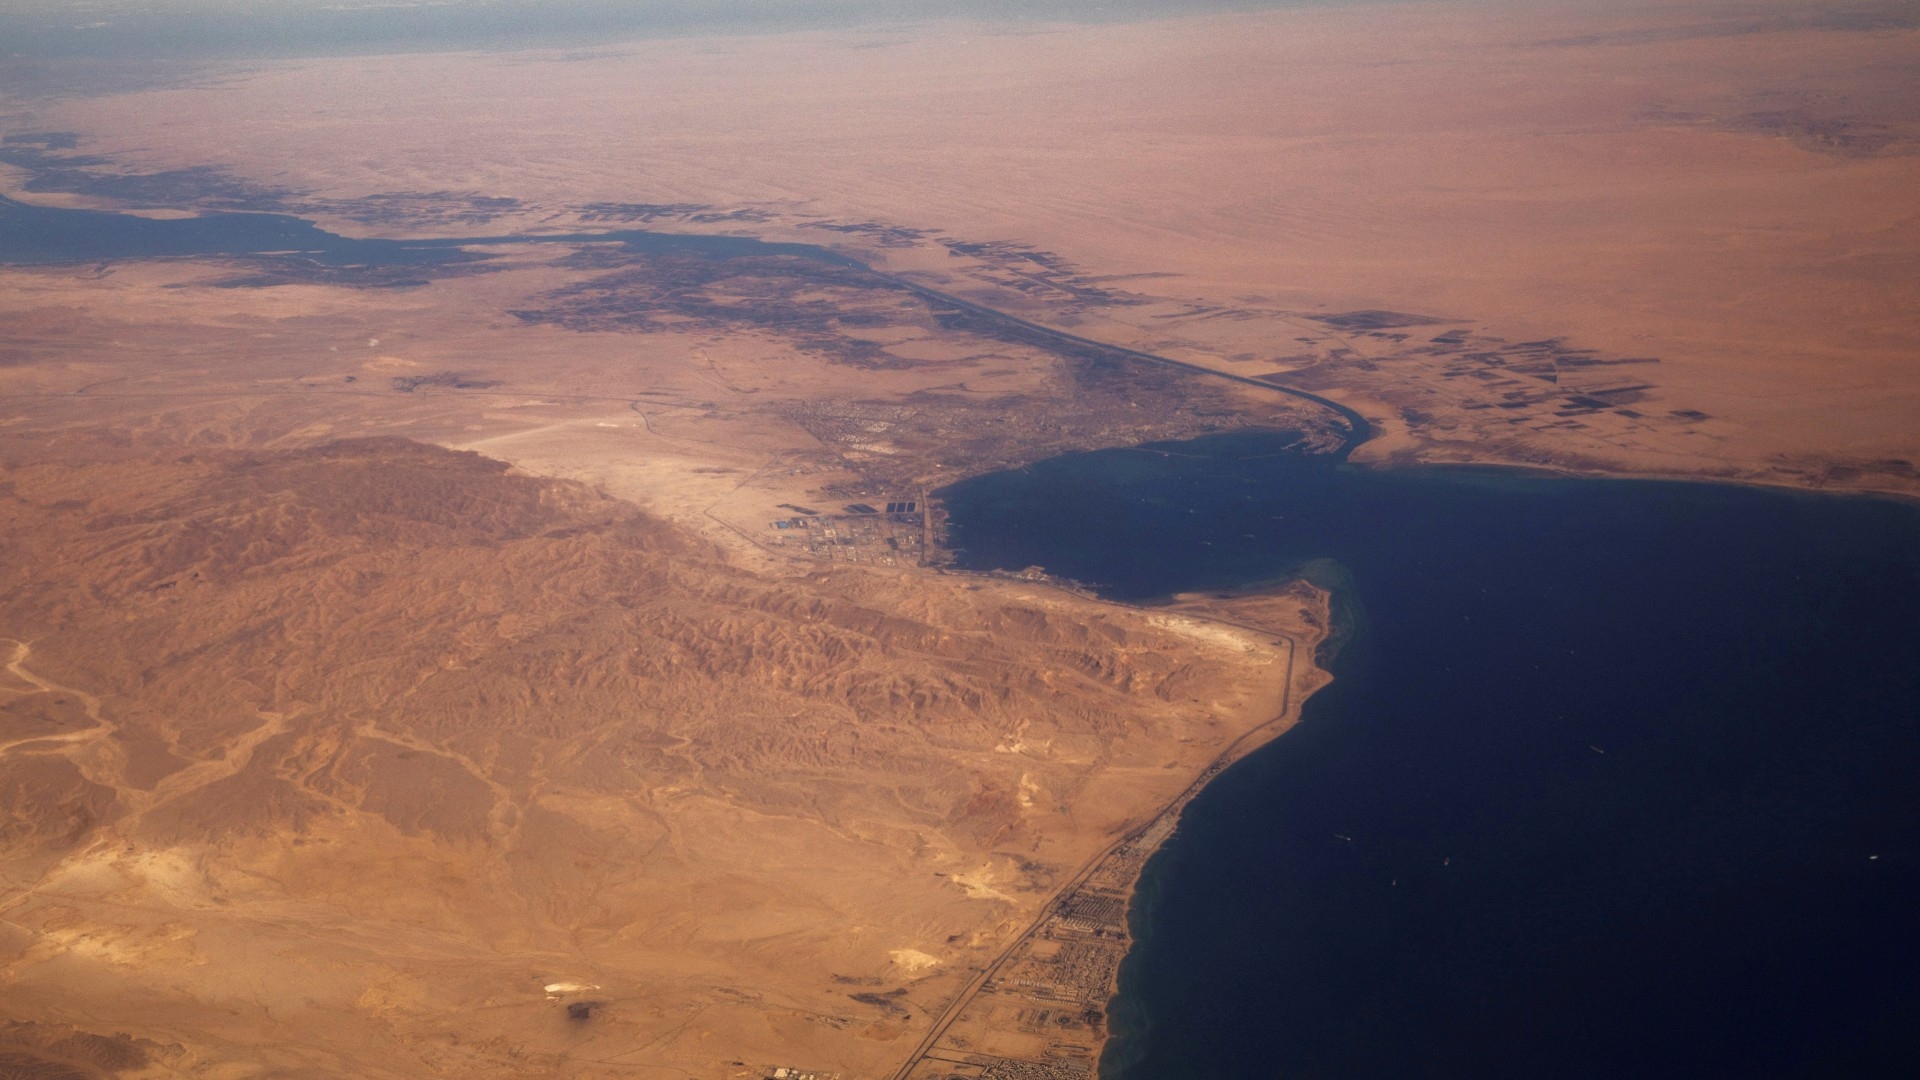 The Suez Canal connecting the Mediterranean Sea to the Red Sea is pictured from the window of a commercial plane flying over Egypt, 18 December 2019 (Reuters/Lucas Jackson)